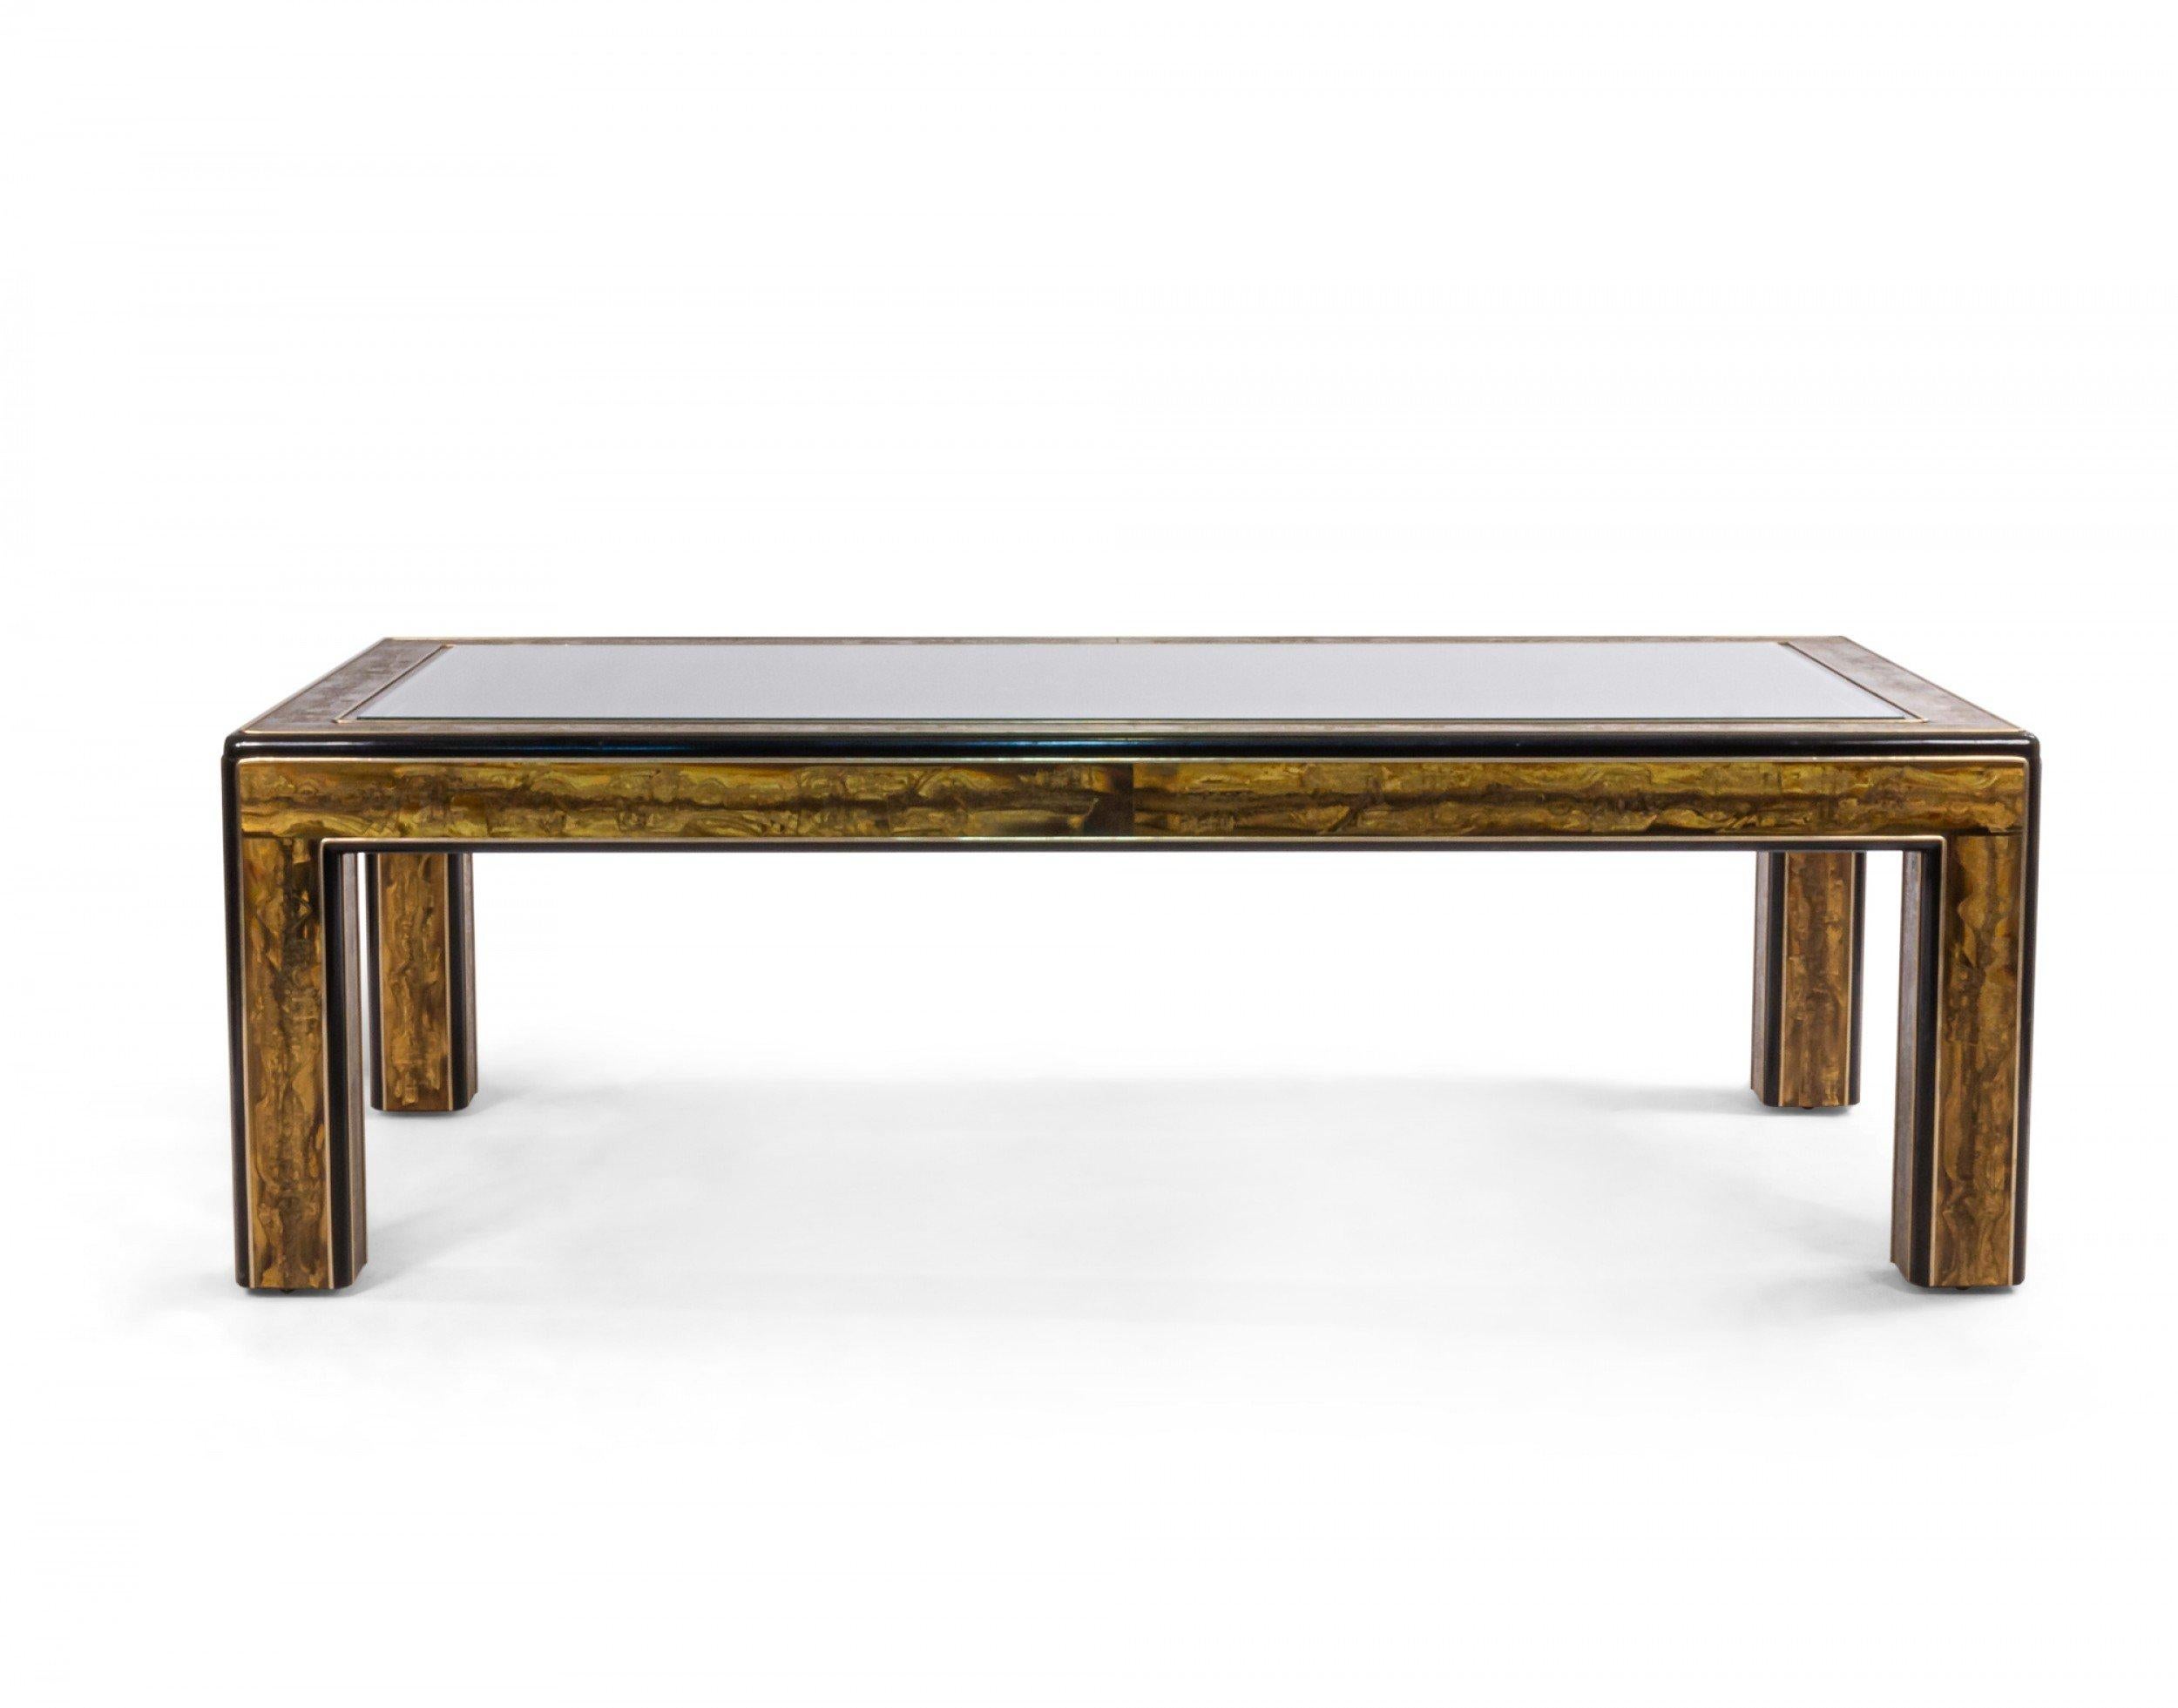 Midcentury American acid etched brass and lacquered wood coffee table with a chinoiserie design and a glass inset top ( by Mastercraft).